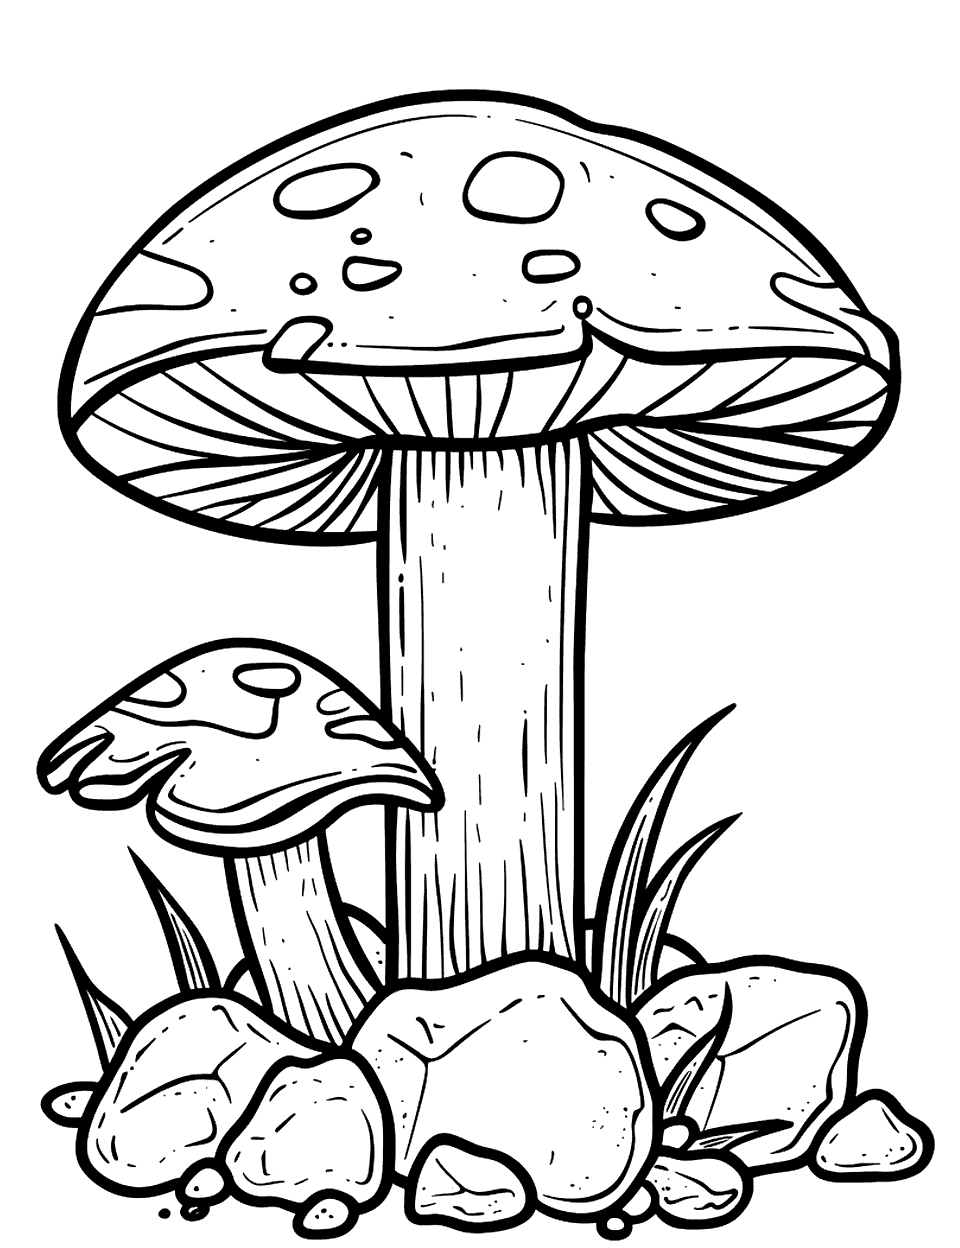 Easy Mushroom and Rocks Coloring Page - A simple scene with a mushroom growing among small, easy-to-color rocks.